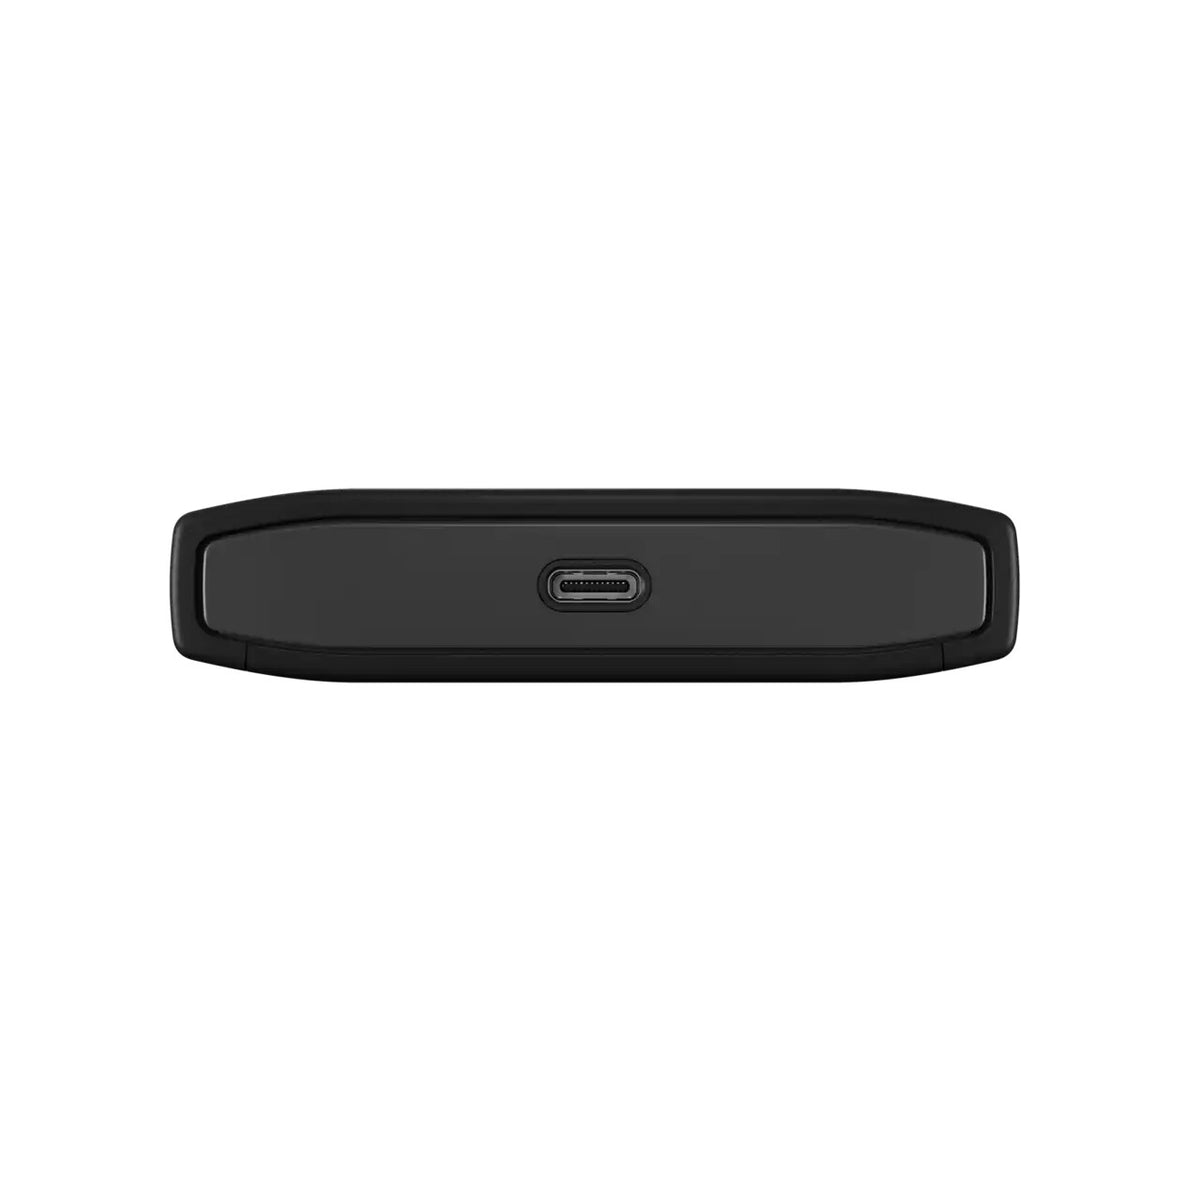 SanDisk G-DRIVE ArmorLock with Password Protection - External solid state drive - 1 TB